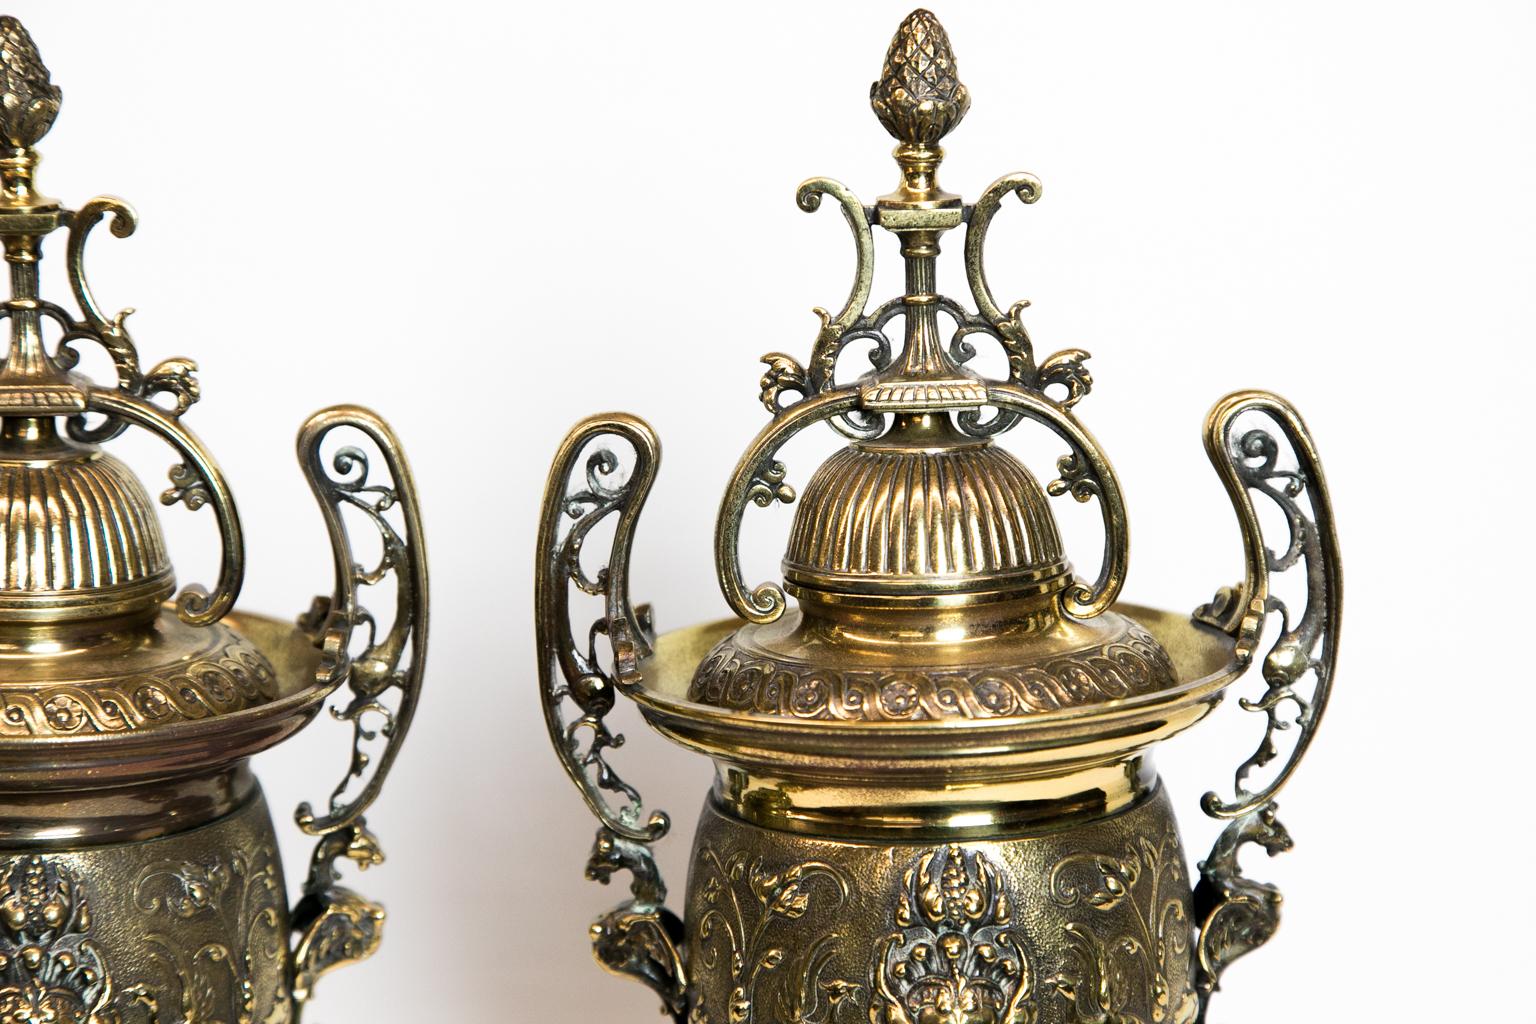 Pair of French Cassolettes has raised floral arabesques on a stipled background and are on a rouge de fer base. The removable top has a reeded dome topped with a pineapple finial.